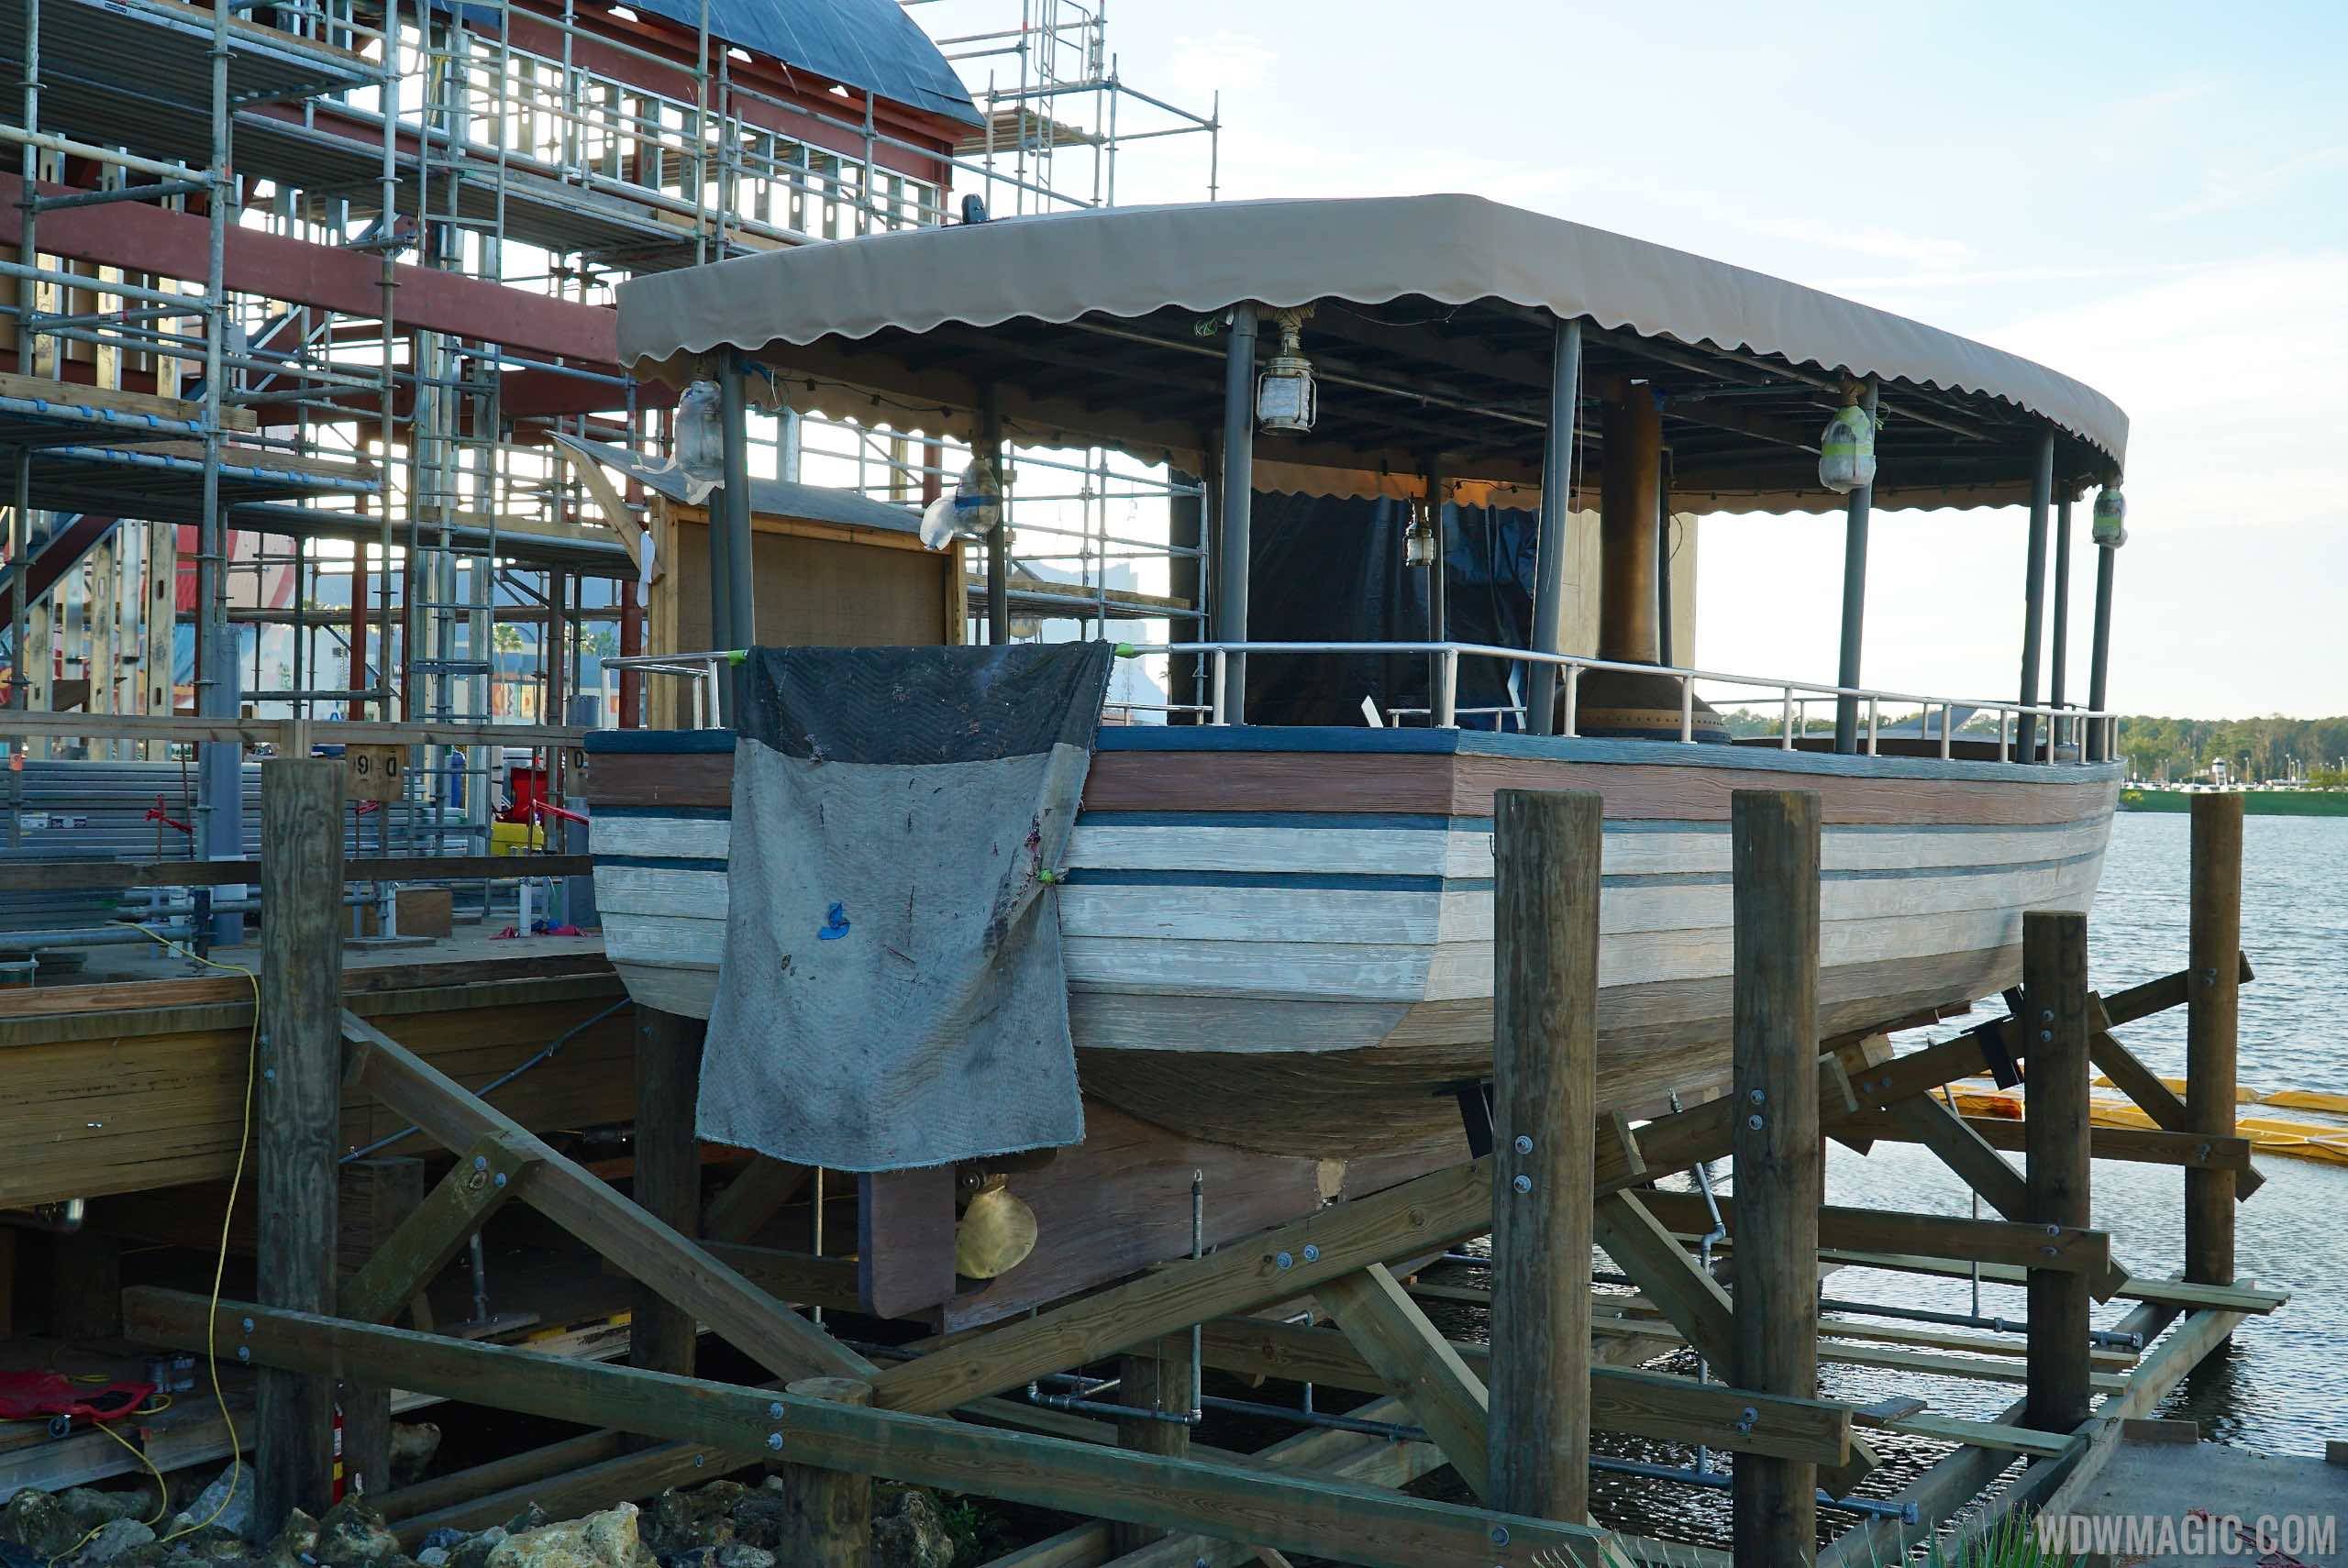 PHOTOS - Boat arrives at The Hangar to form part of the outdoor patio area for the Disney Springs bar